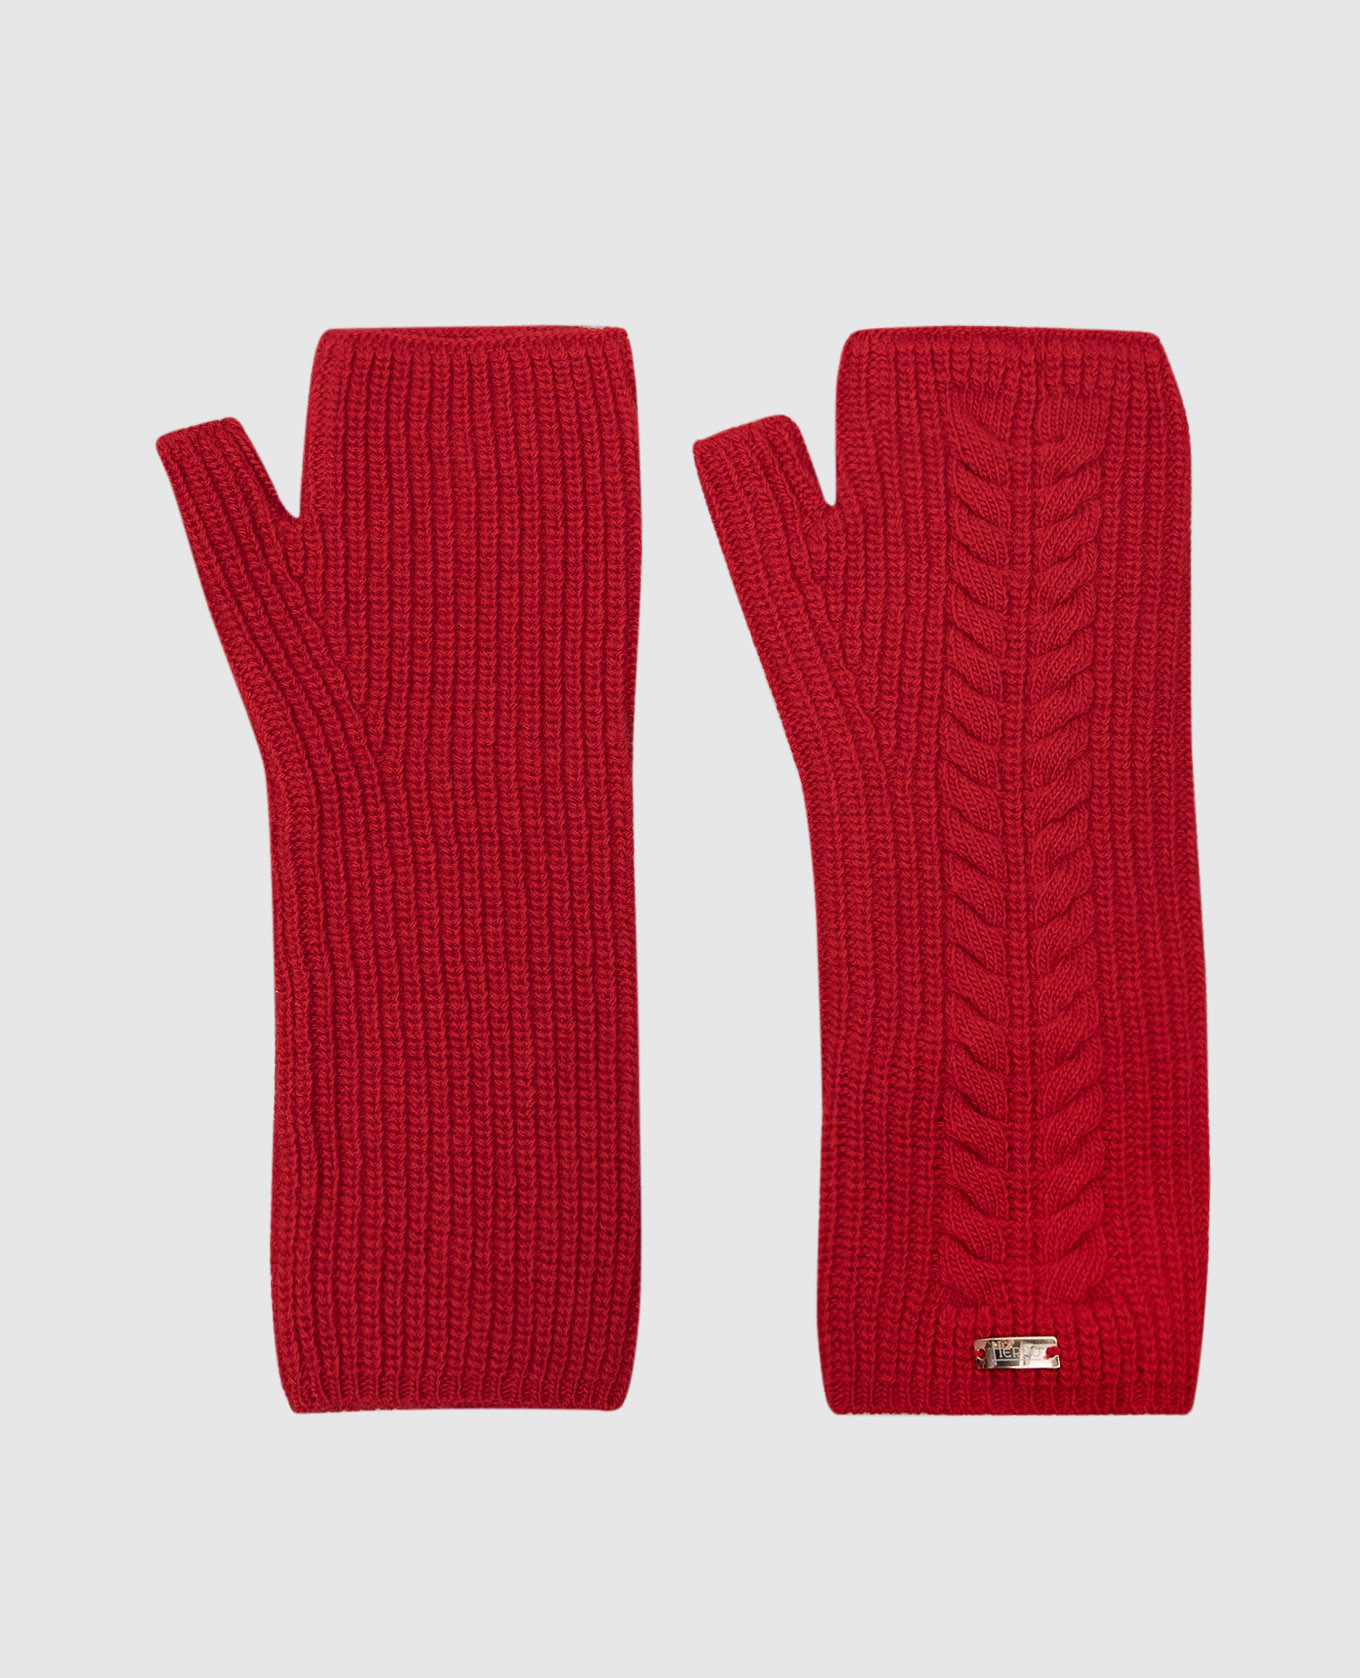 Red mittens made of wool with a textured pattern